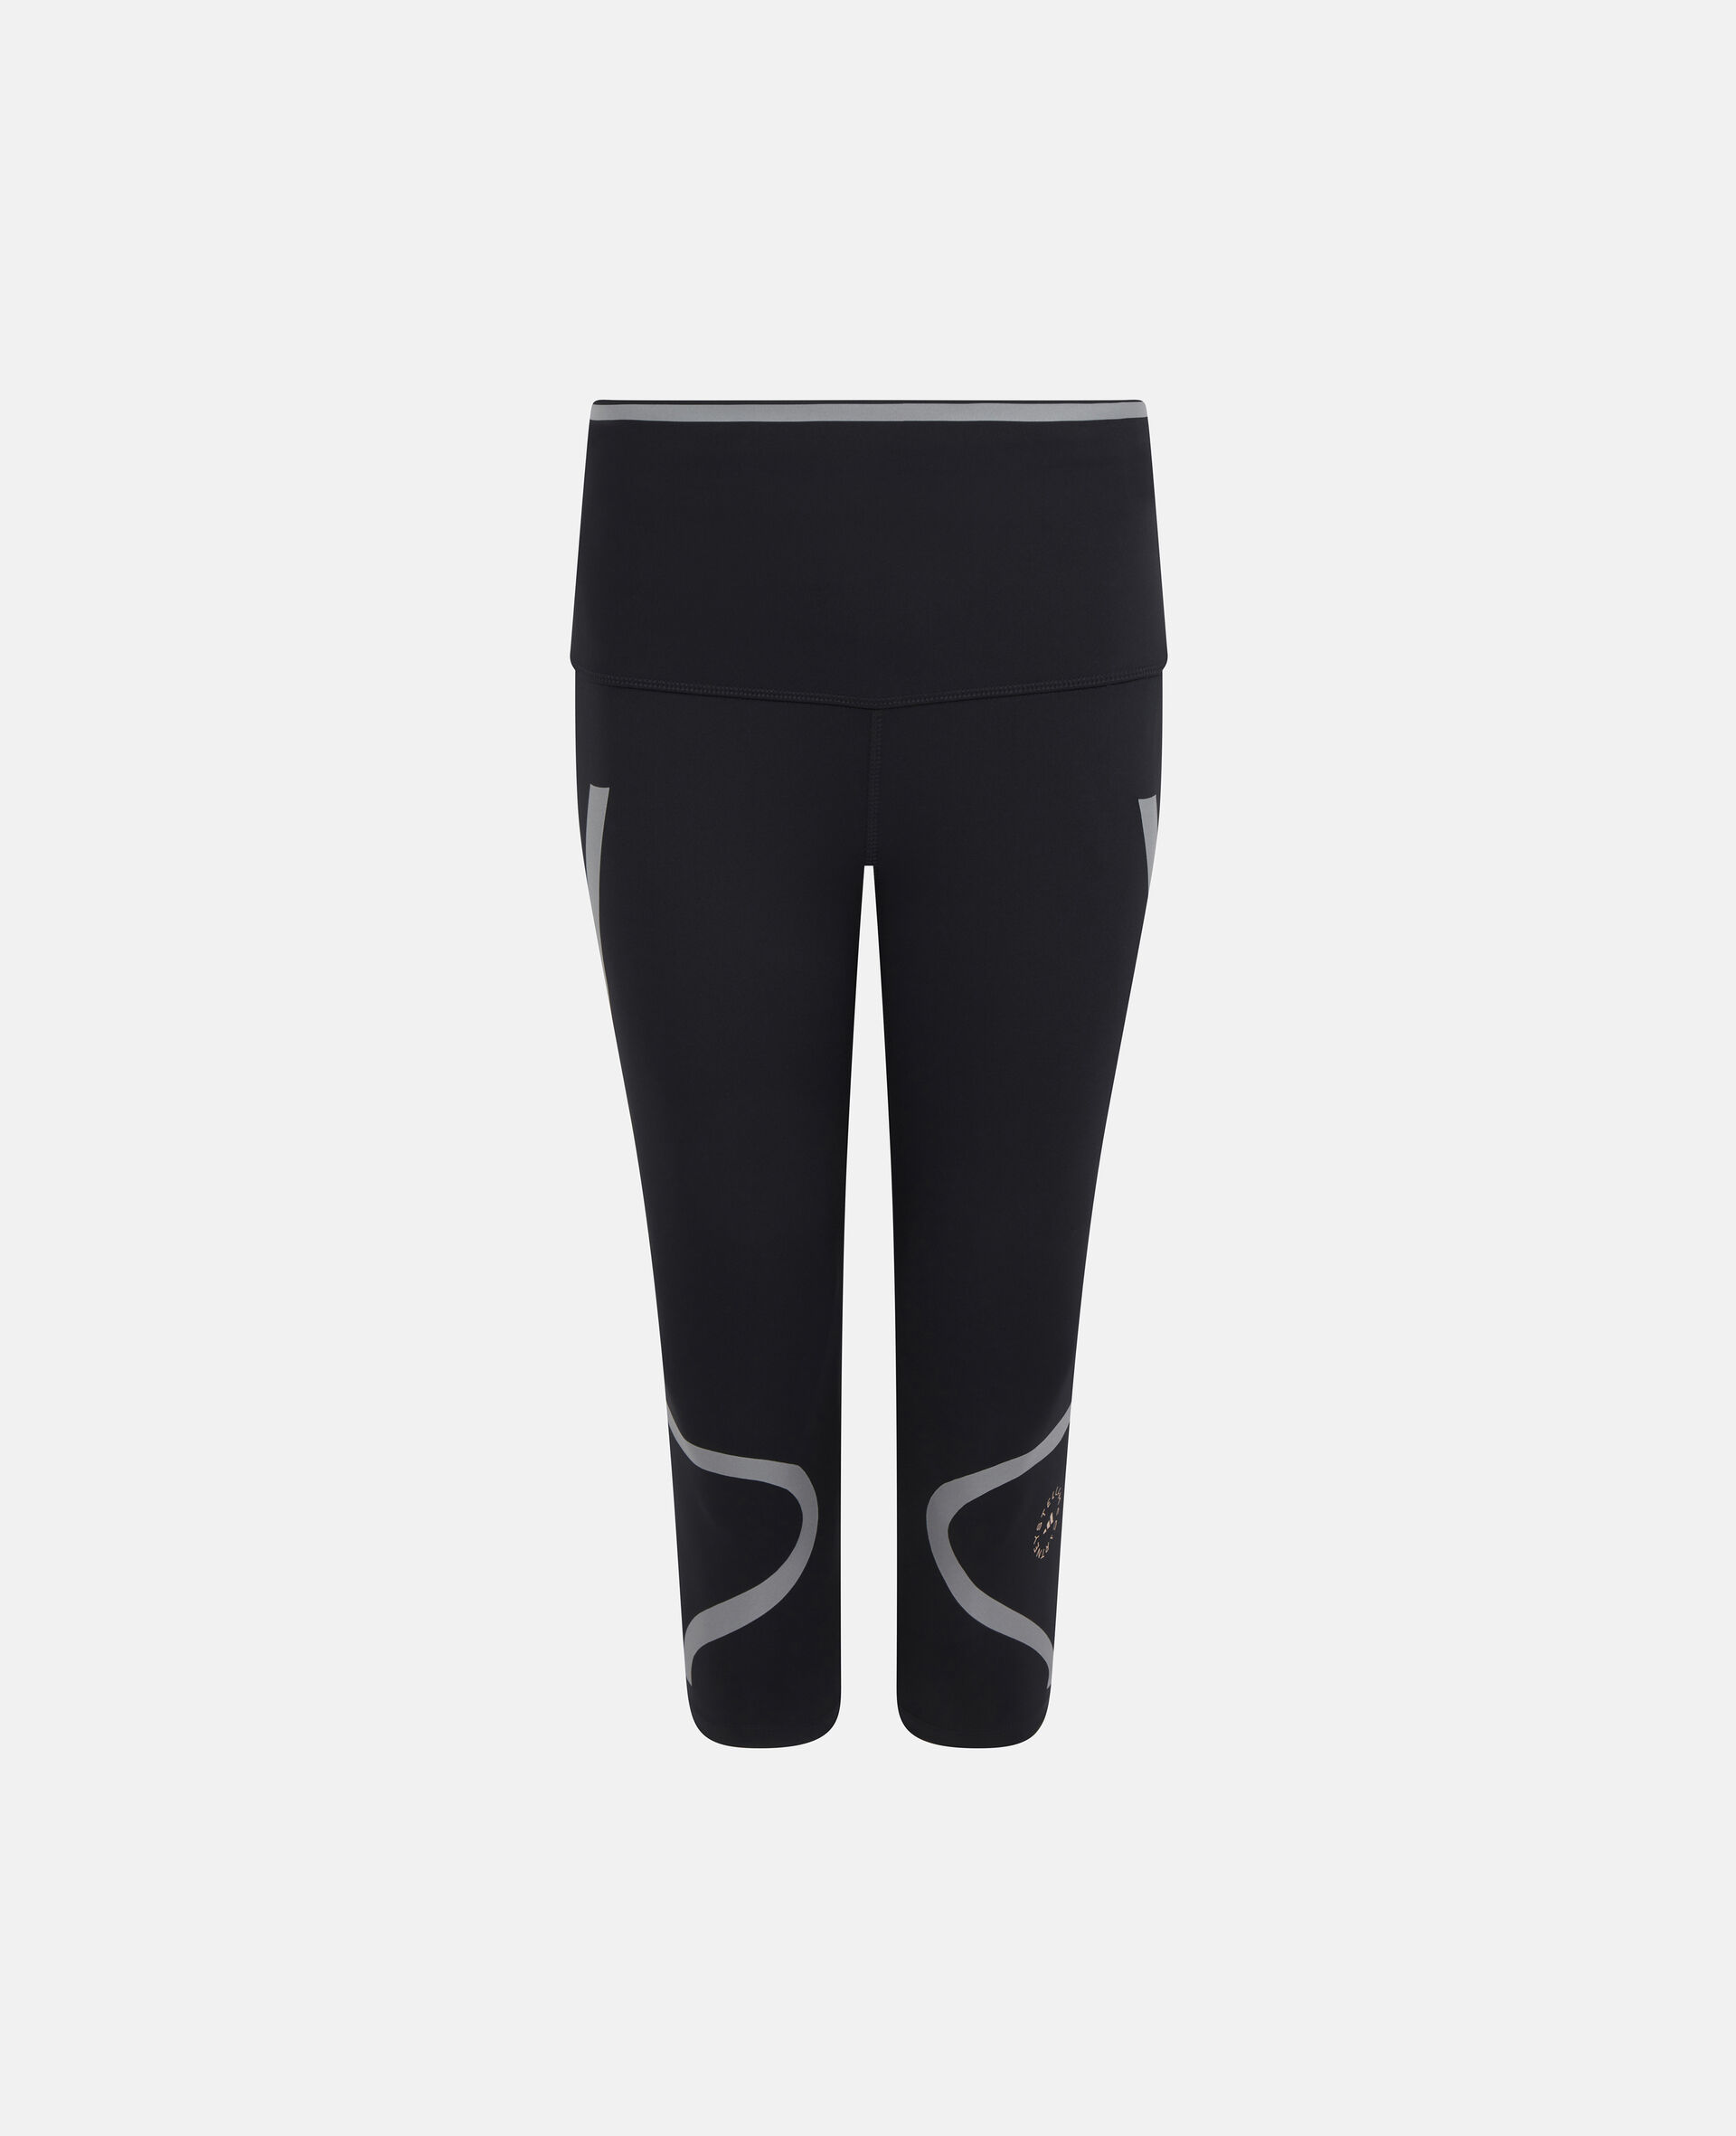 TruePace 3/4 Running Tights-Black-large image number 0